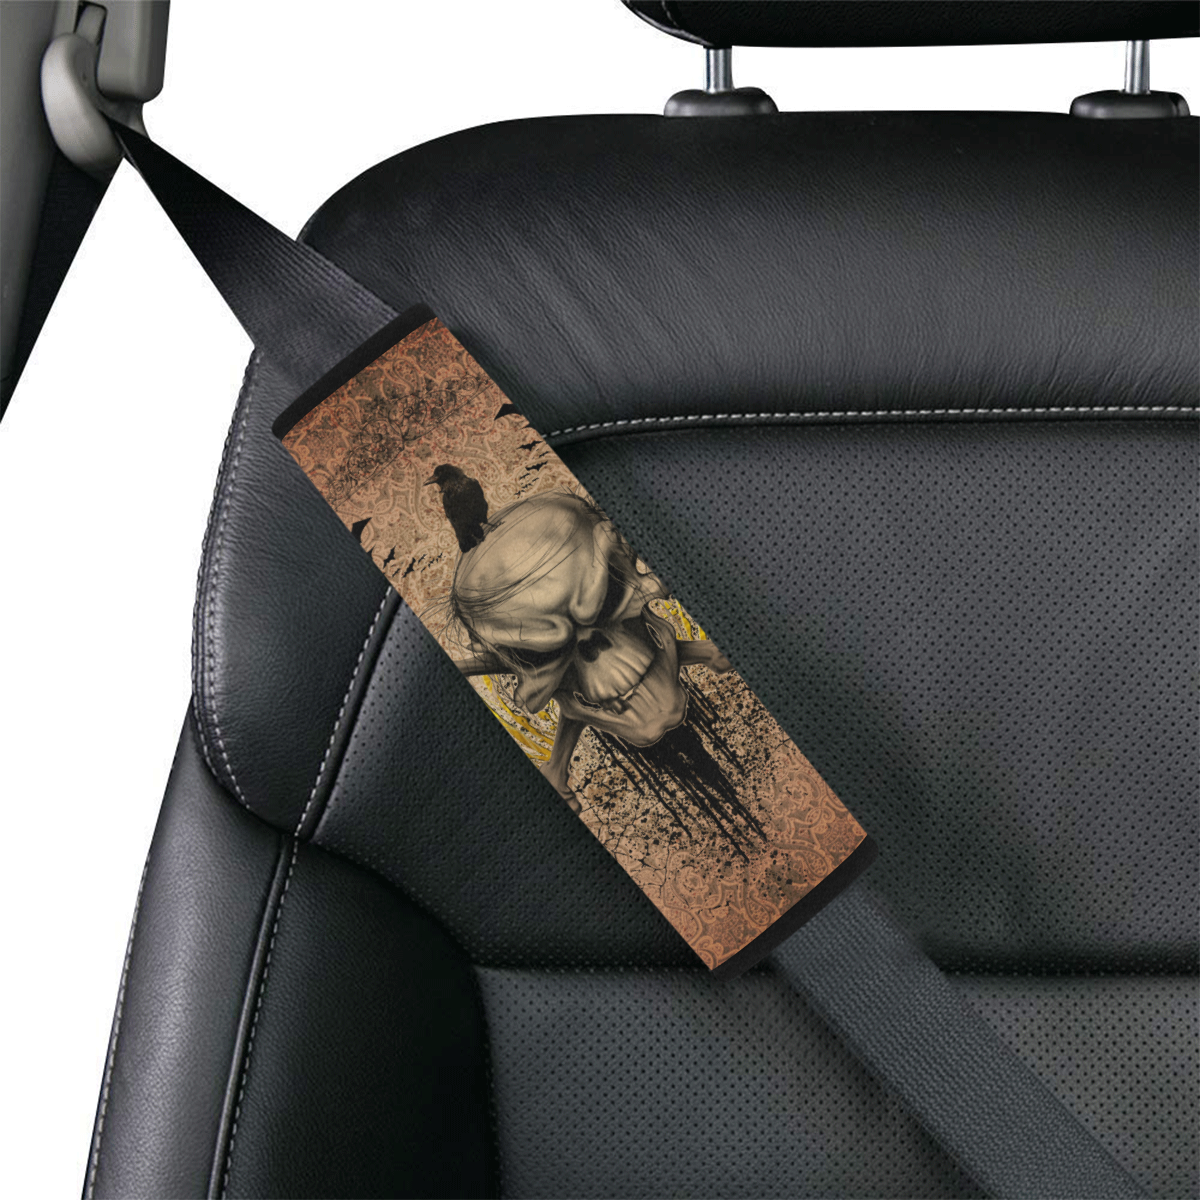 The scary skull with crow Car Seat Belt Cover 7''x8.5''